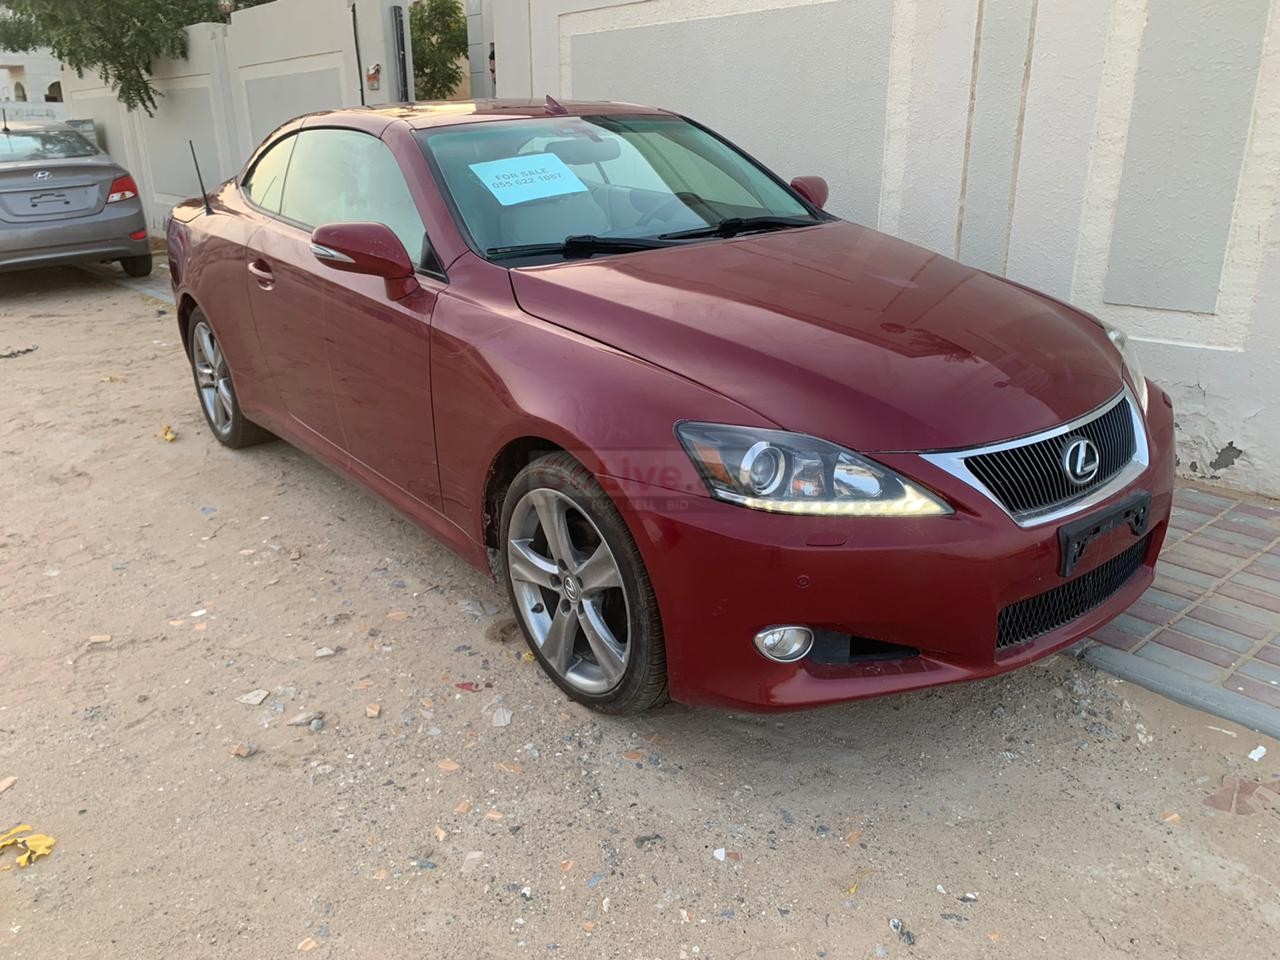 LEXUS IS 250C 2012 IN PERFECT CONDITION DONE 96,710 MILES IMPORTED ...